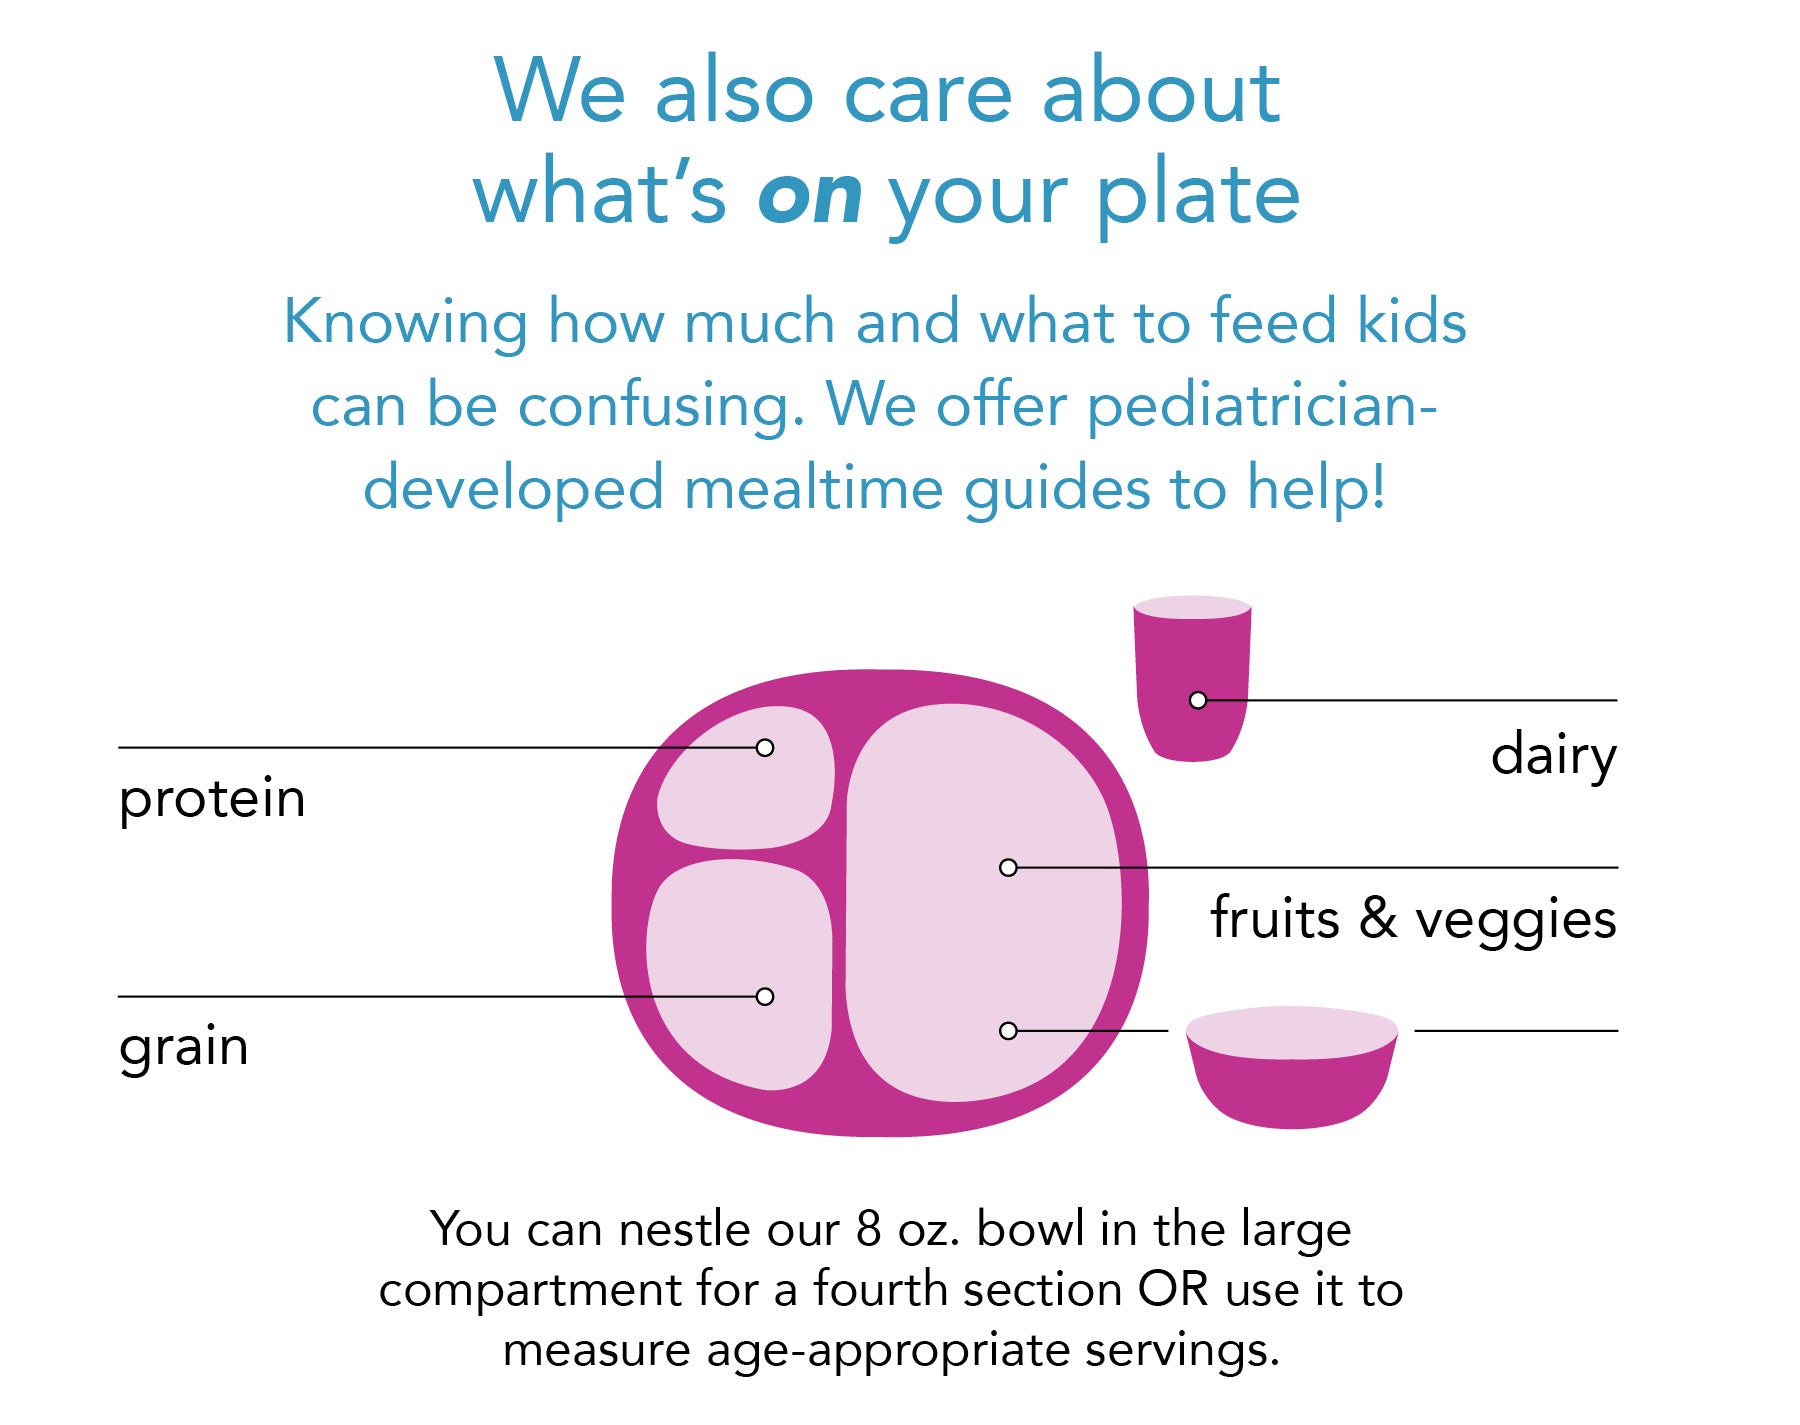 We also care about what's on your plate. Knowing how much and what to feed kids can be confusing. We offer pediatrician-developed mealtime guides to help. Protein, grain, dairy, fruits and vegetable -appropriate serving sizes for any age